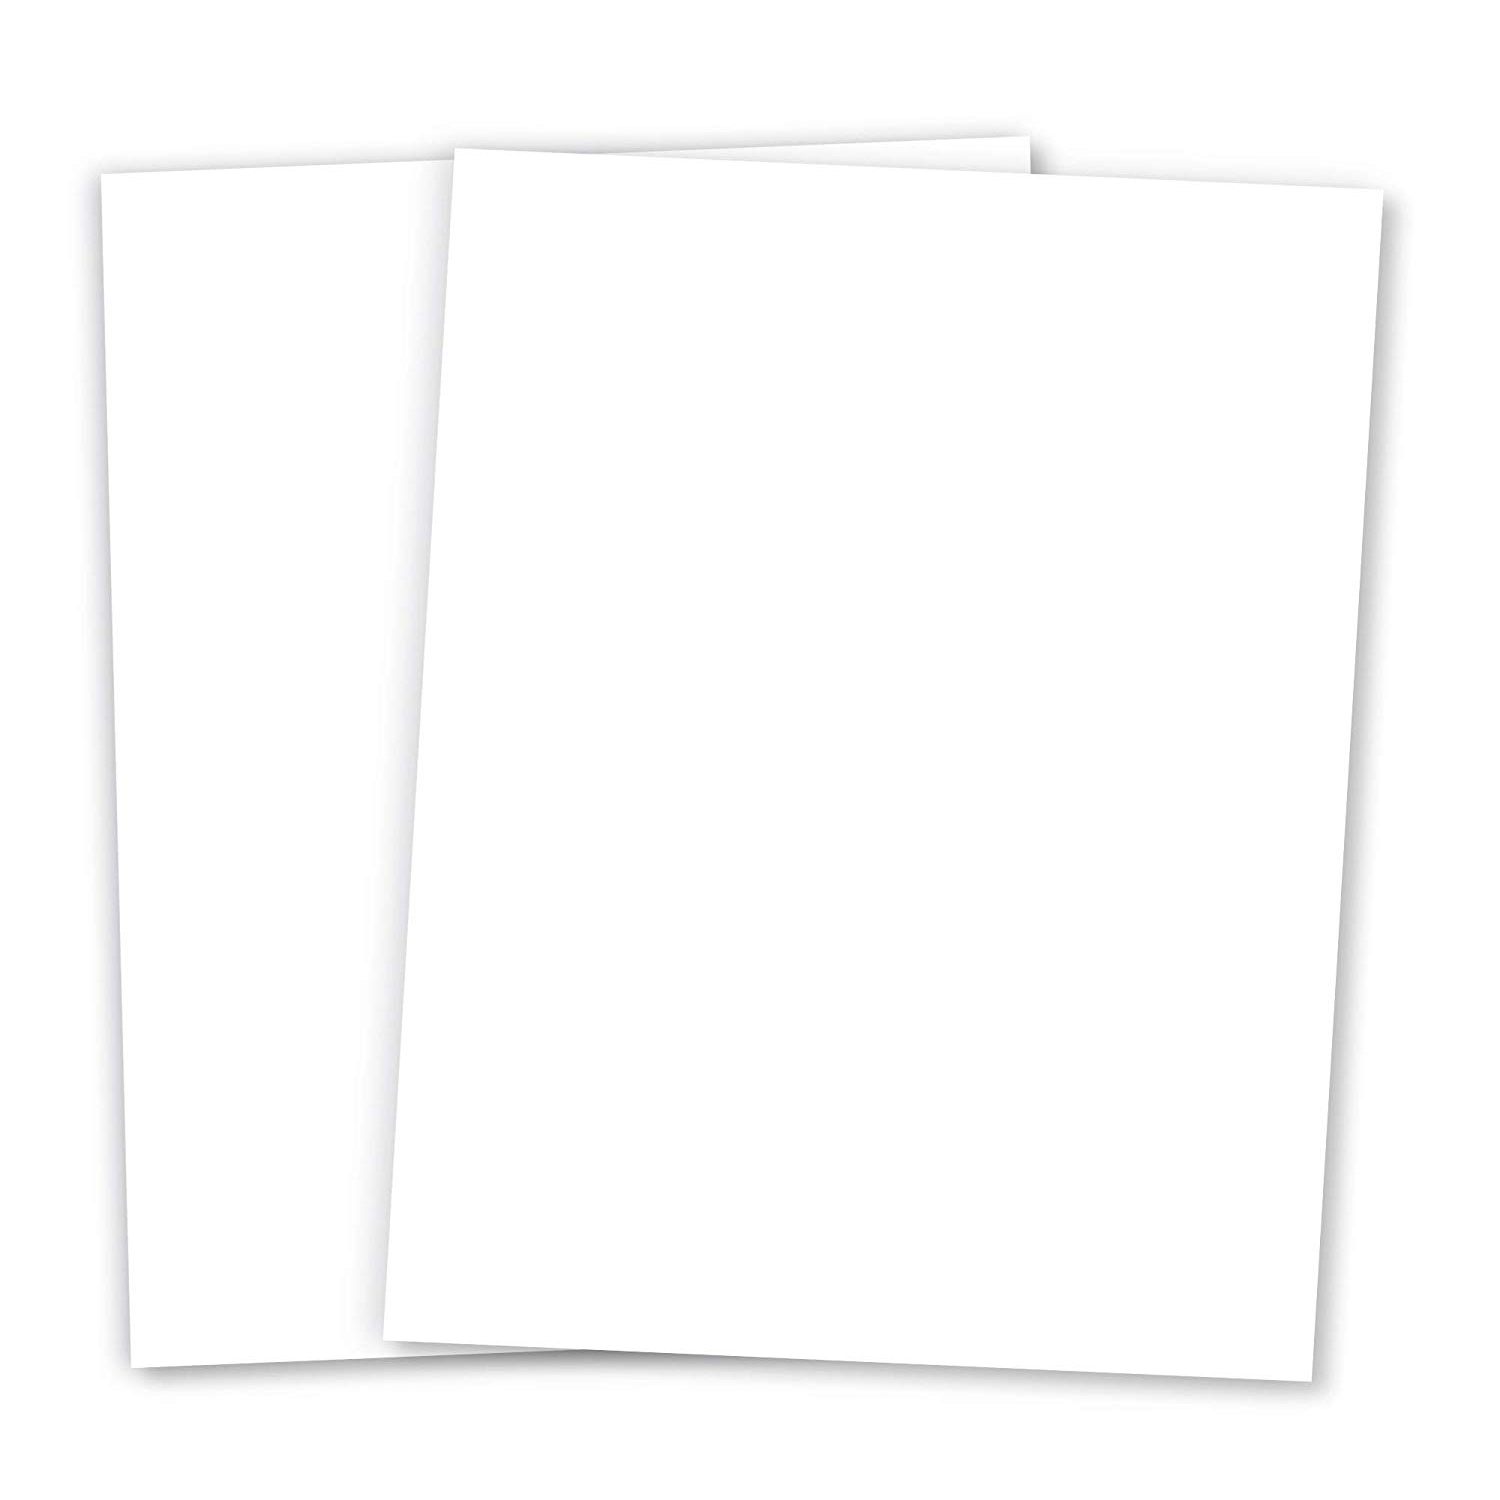 Extra Thick 11 x 17 Cardstock for Inkjet or Laser Printers 100lb Cover 270 GSM Heavy Printer Paper Great for Cards Covers 50 Sheet Pack Matte Finish White Menu's Posters 